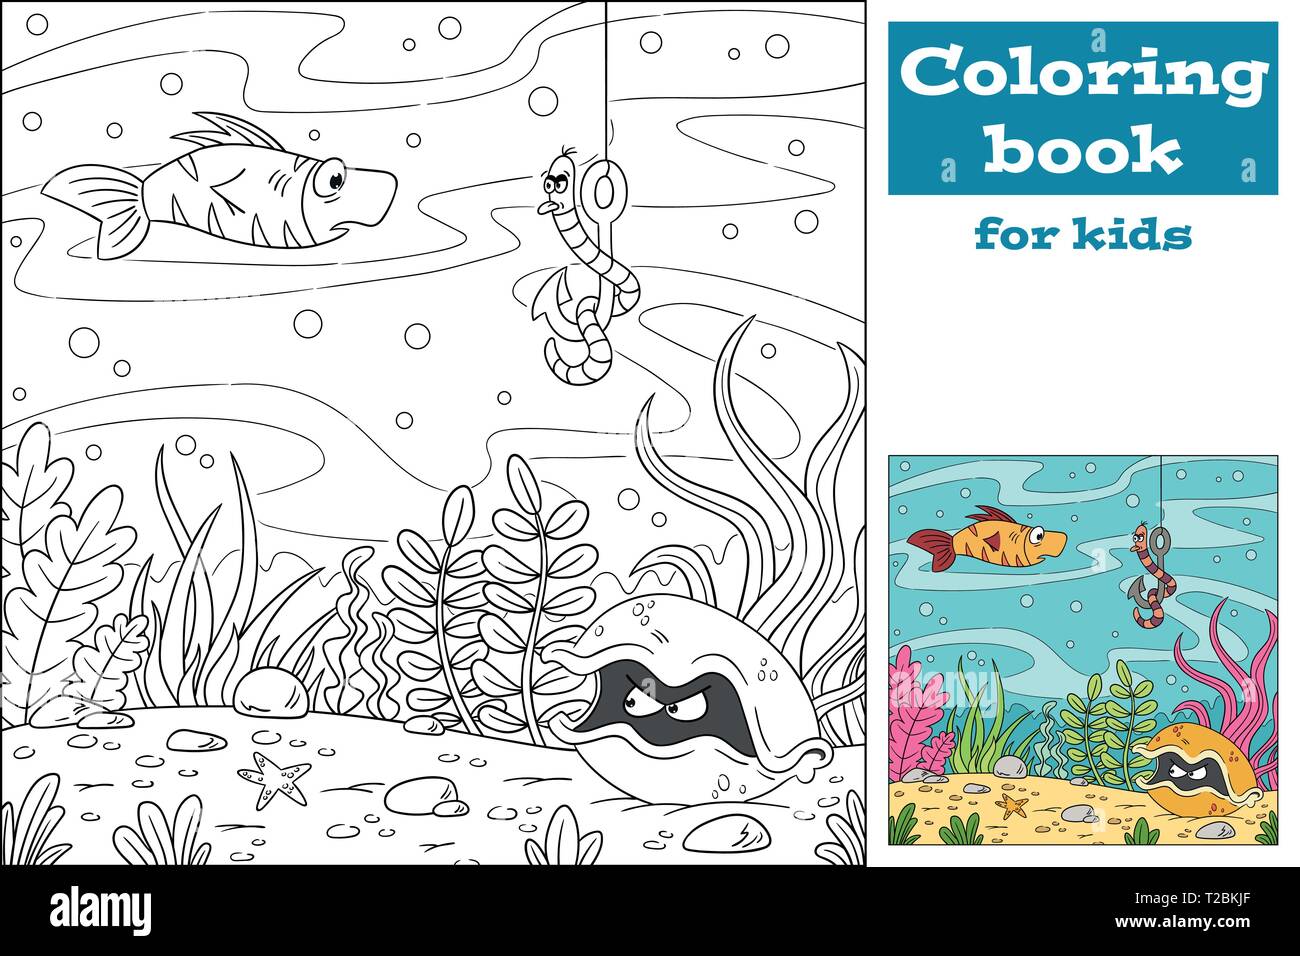 Coloring book for kids. Hand draw vector illustration with separate layers. Stock Vector